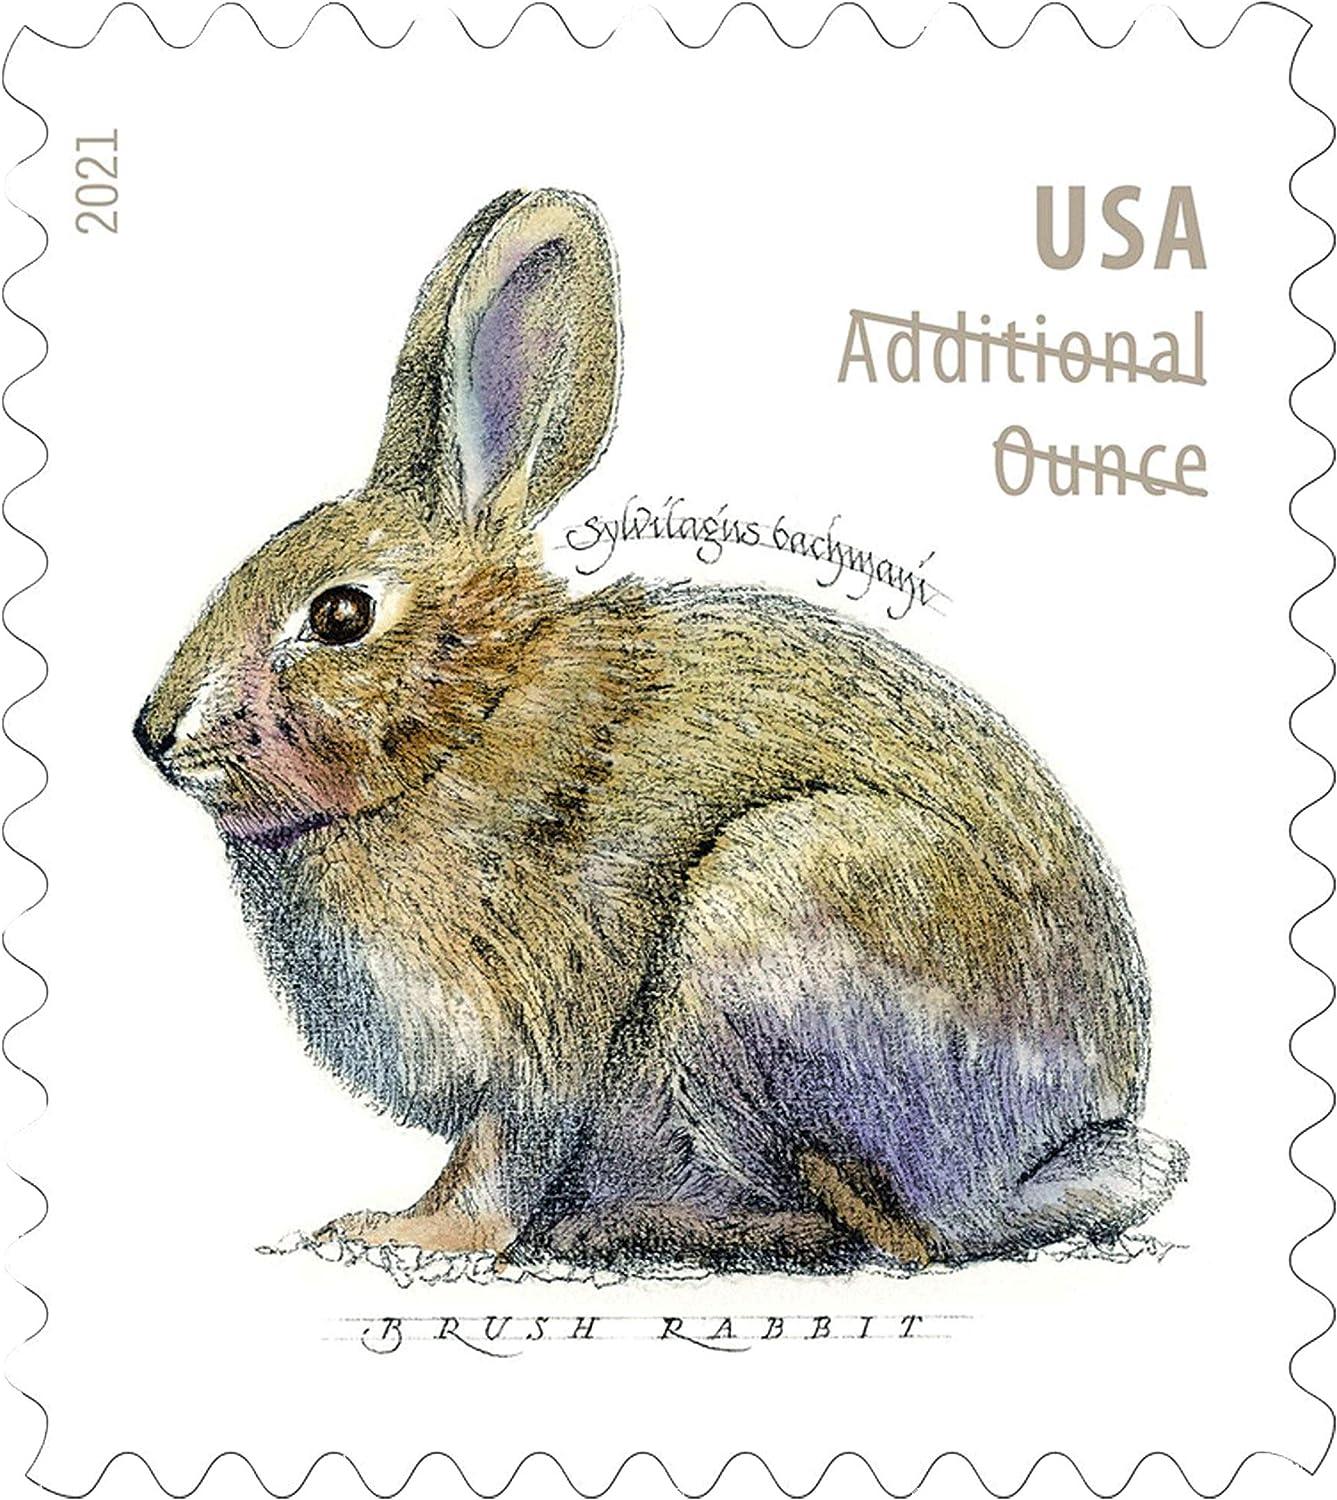 Brush Rabbit Additional Ounce Forever Postage Stamps Sheet of 20 US Postal  First Class Wedding Celebration Anniversary Party (20 Stamps) Use Three of  These Stamps for one Ounce Letters. Stamp1